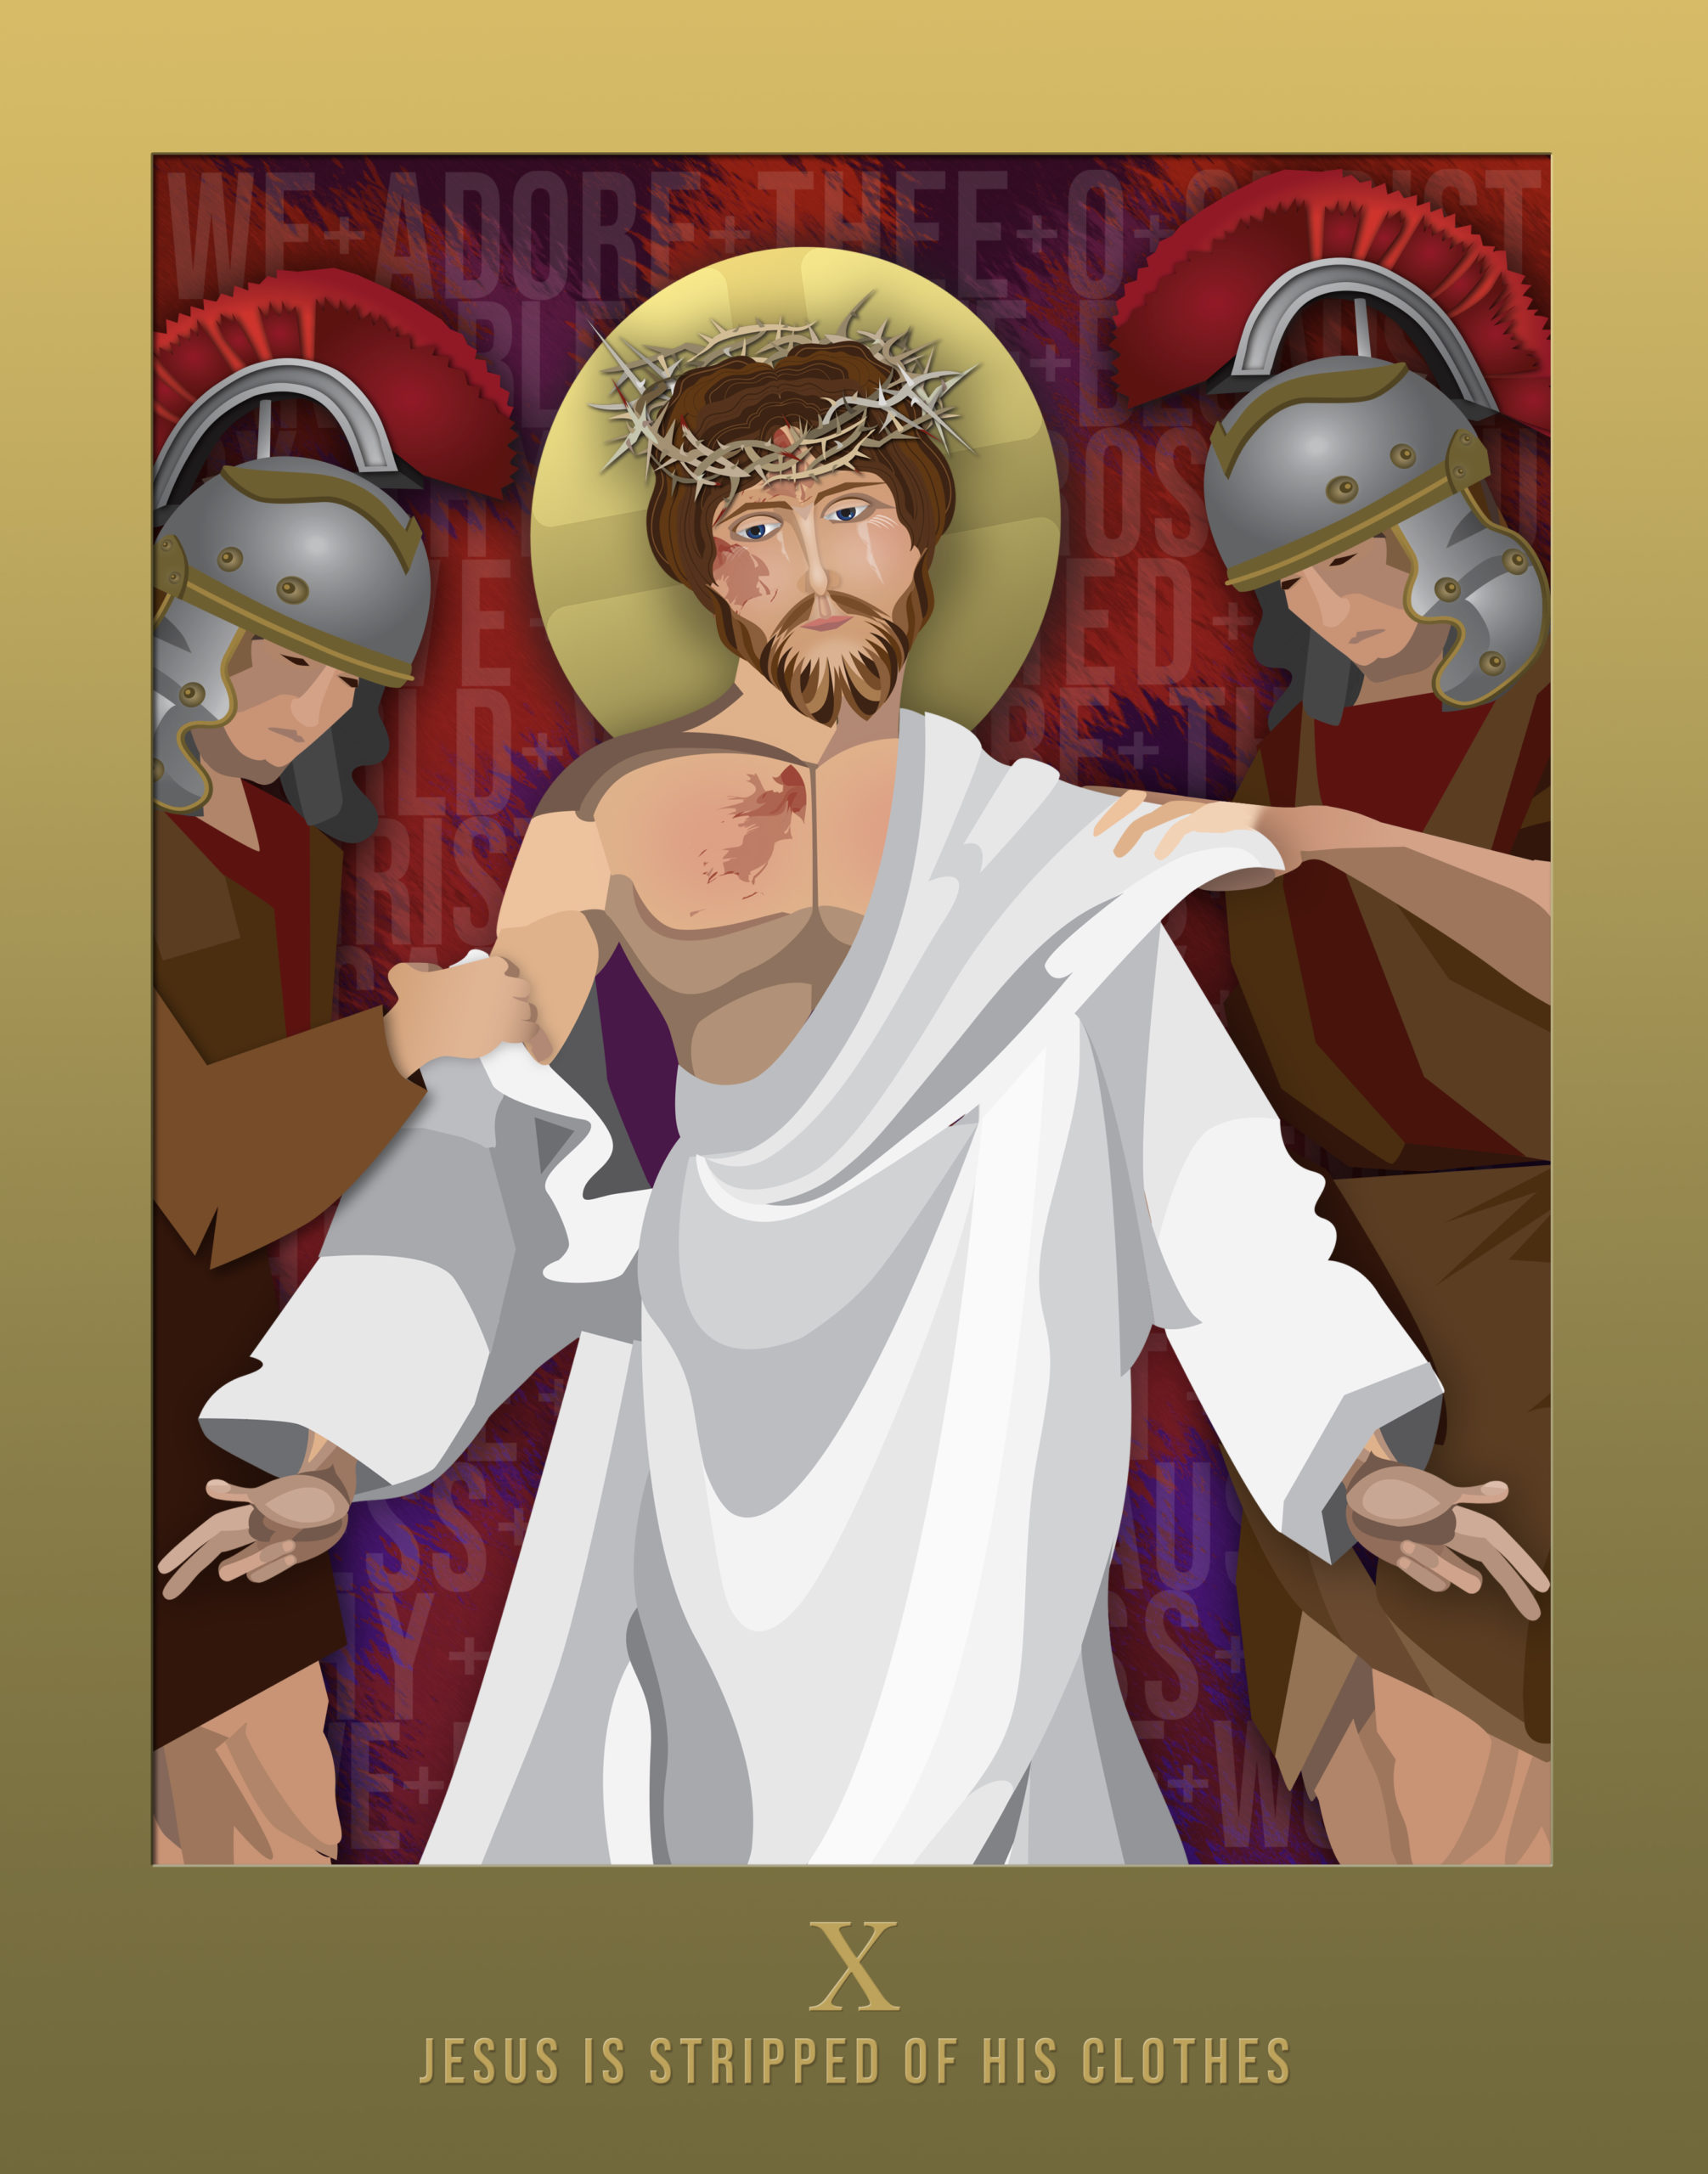 Stations of the Cross – Digital Versions